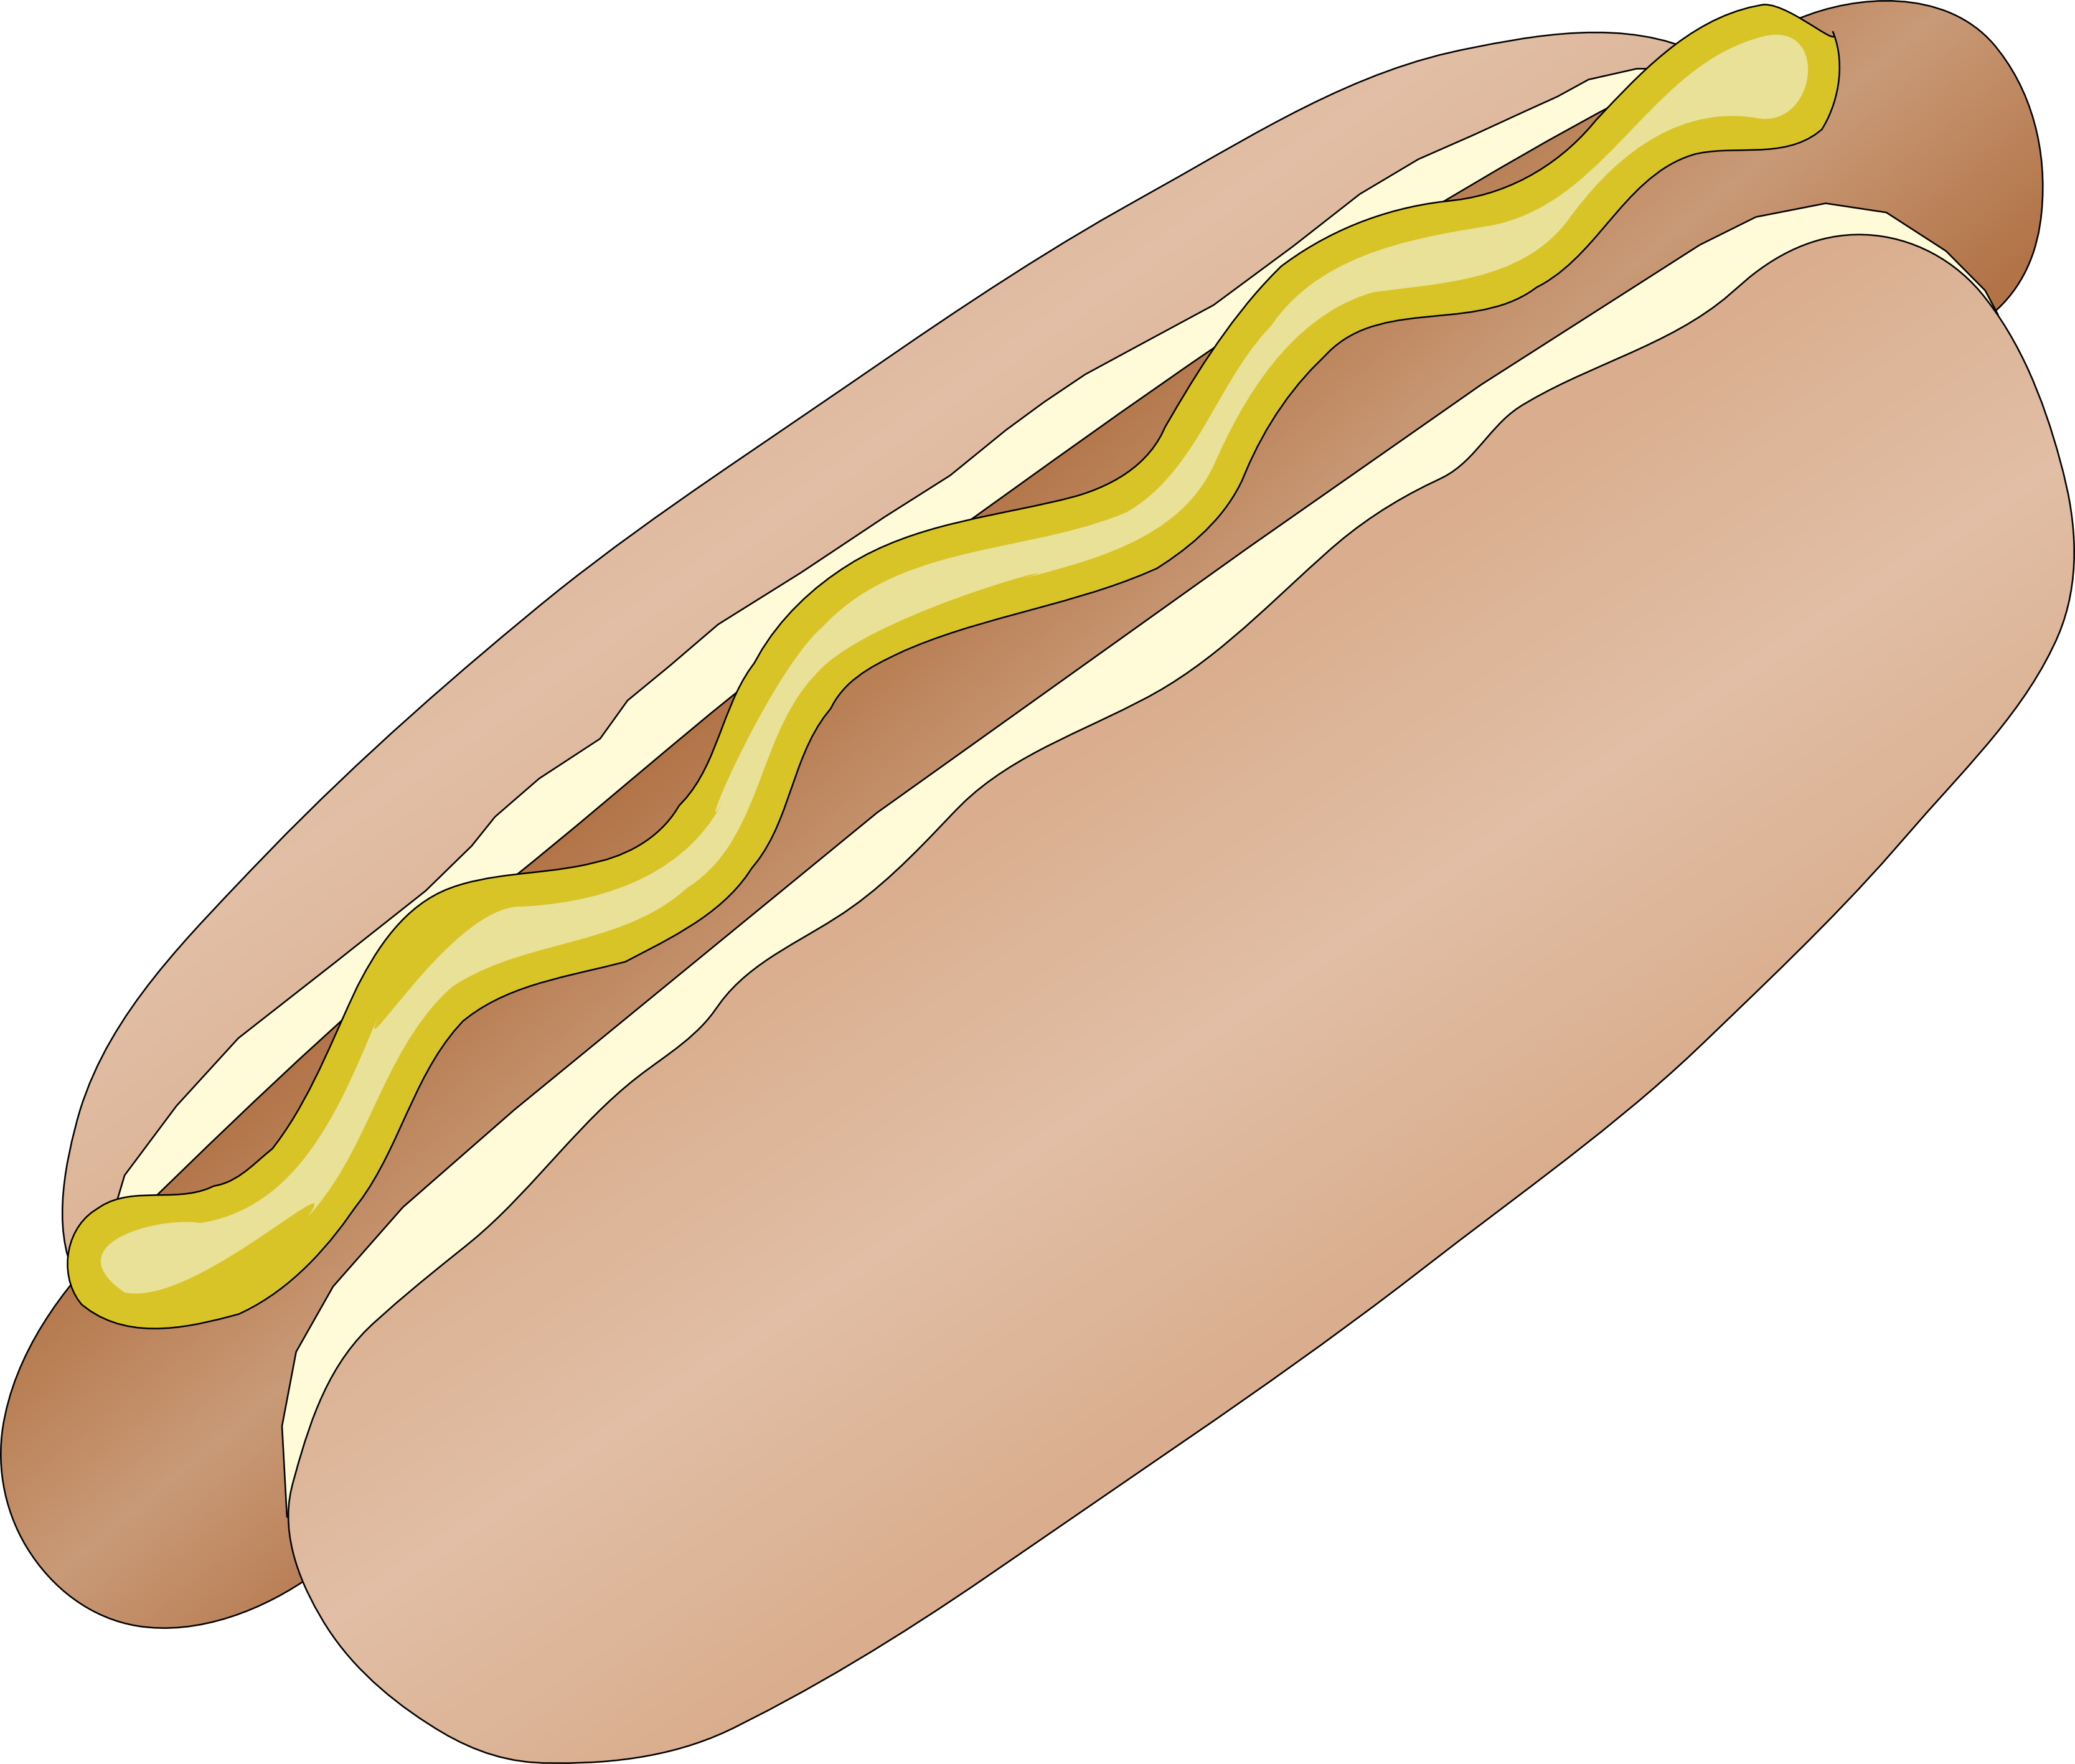 Clip Art: Hot Dog Scalable Vector Graphics SVG - ClipArt Best